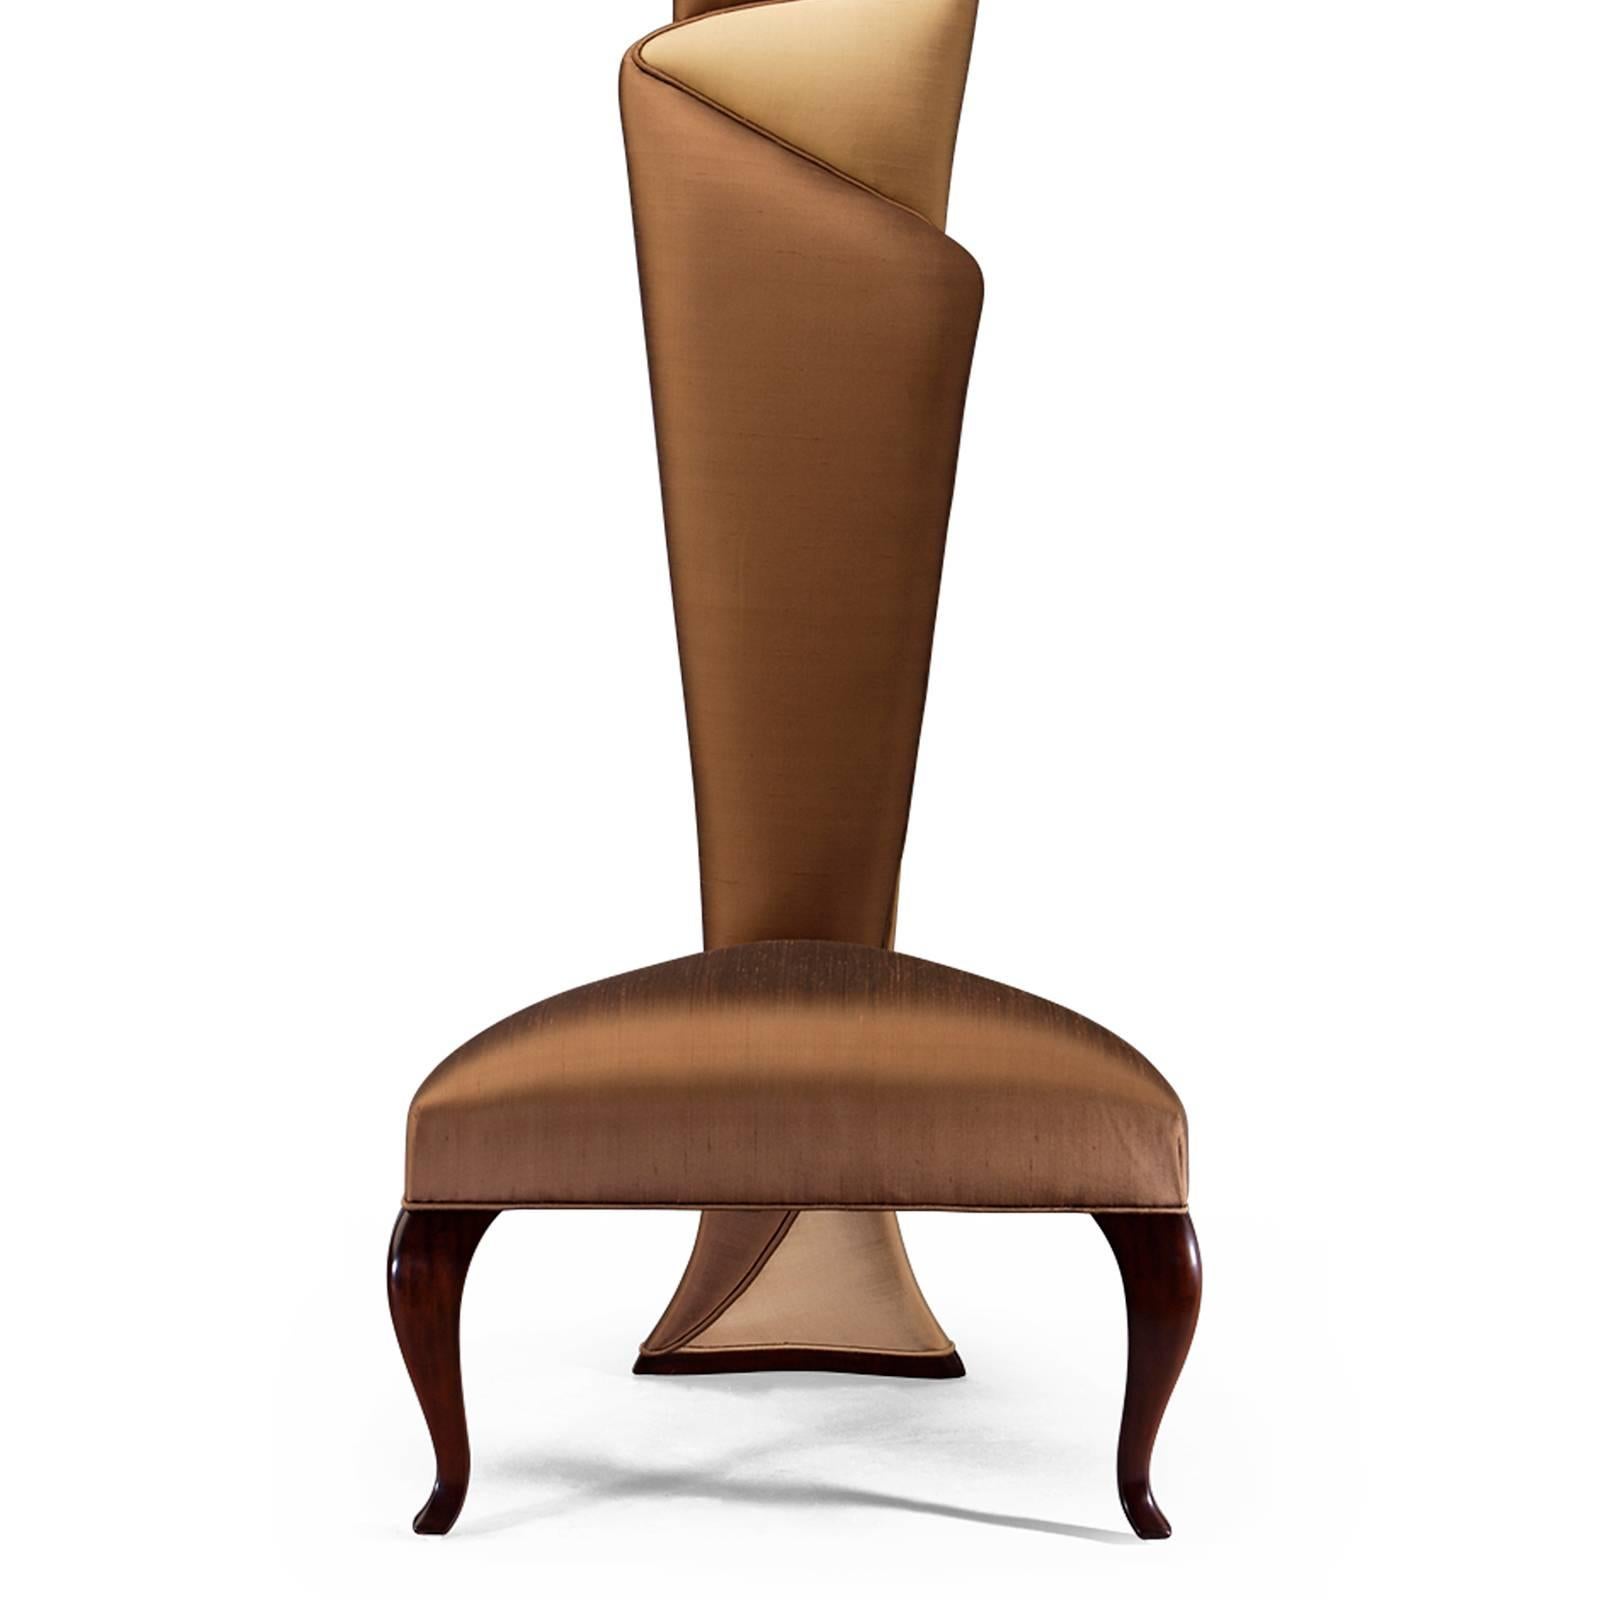 English Ribbon Chair in Solid Mahogany Wood and High Quality Fabric